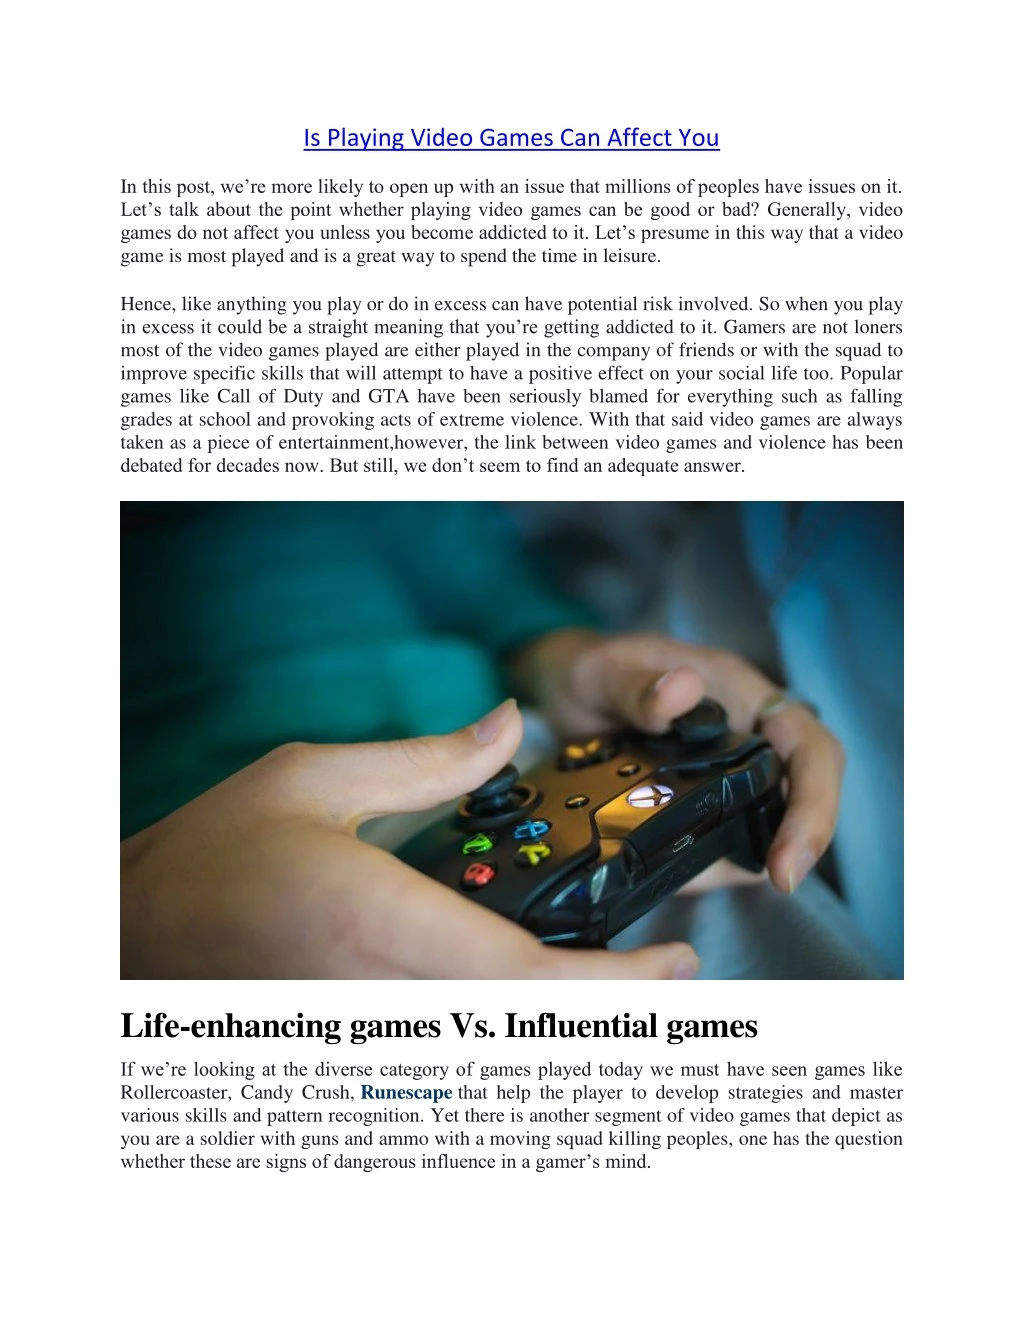 is playing video games can affect you